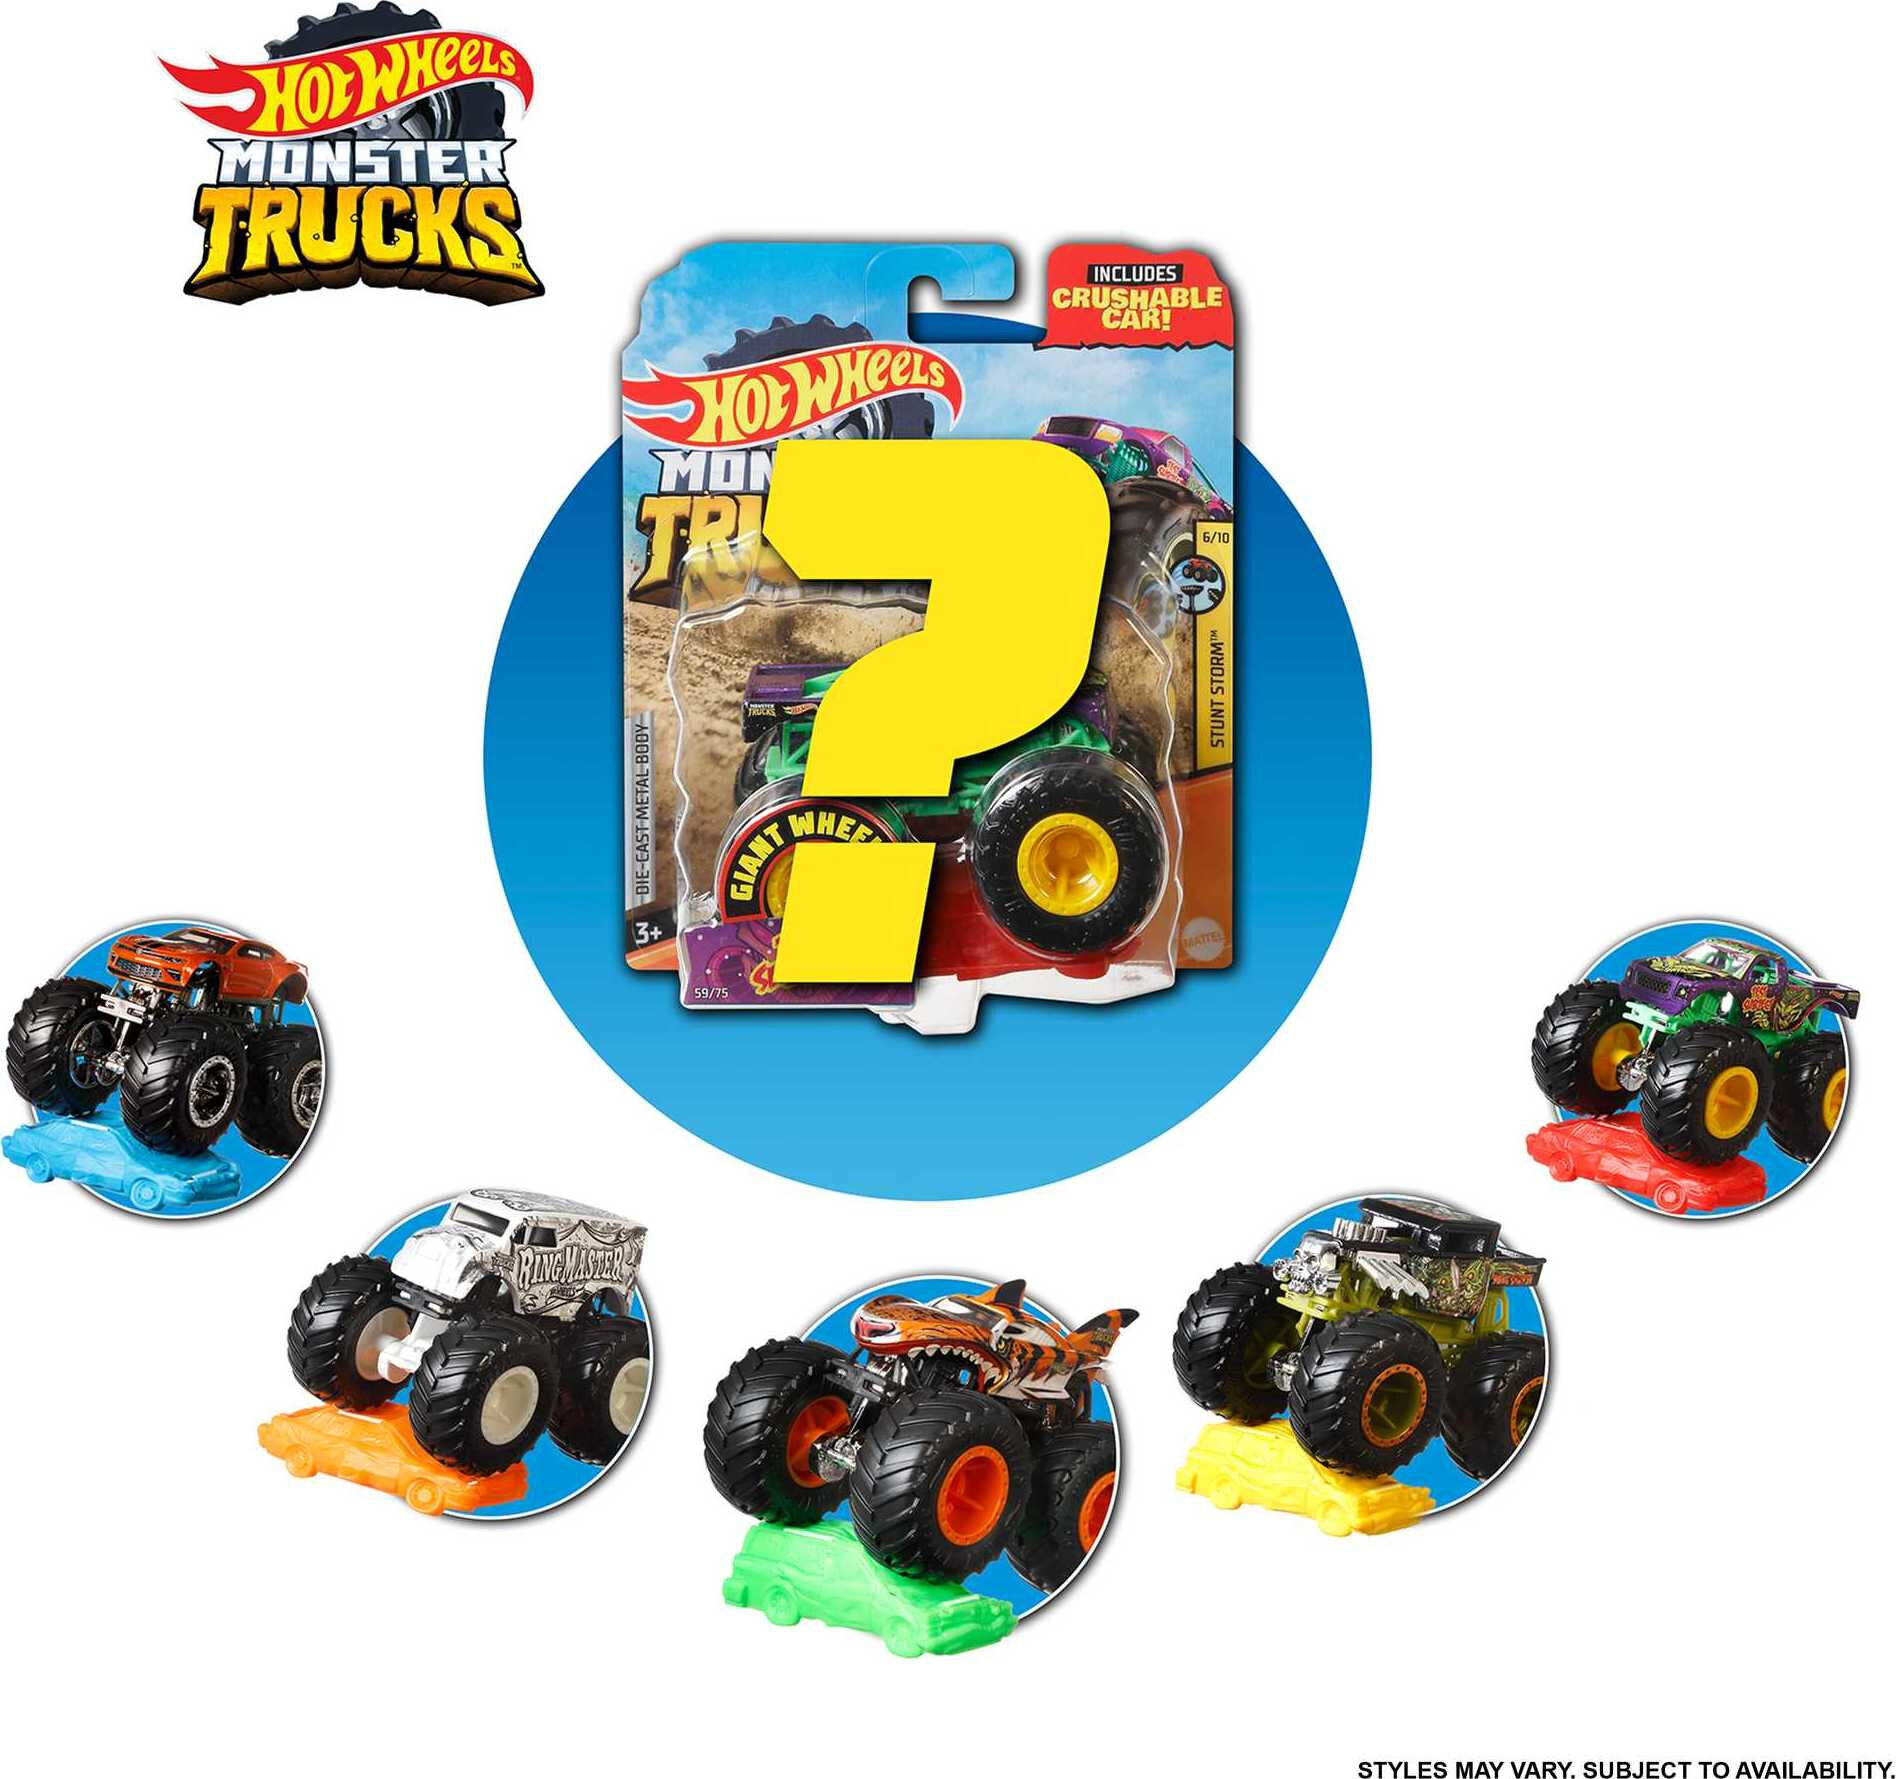 Hot Wheels Monster Trucks, 1:64 Scale Toy Truck & 1 Crushable Car (Styles May Vary) - image 3 of 6